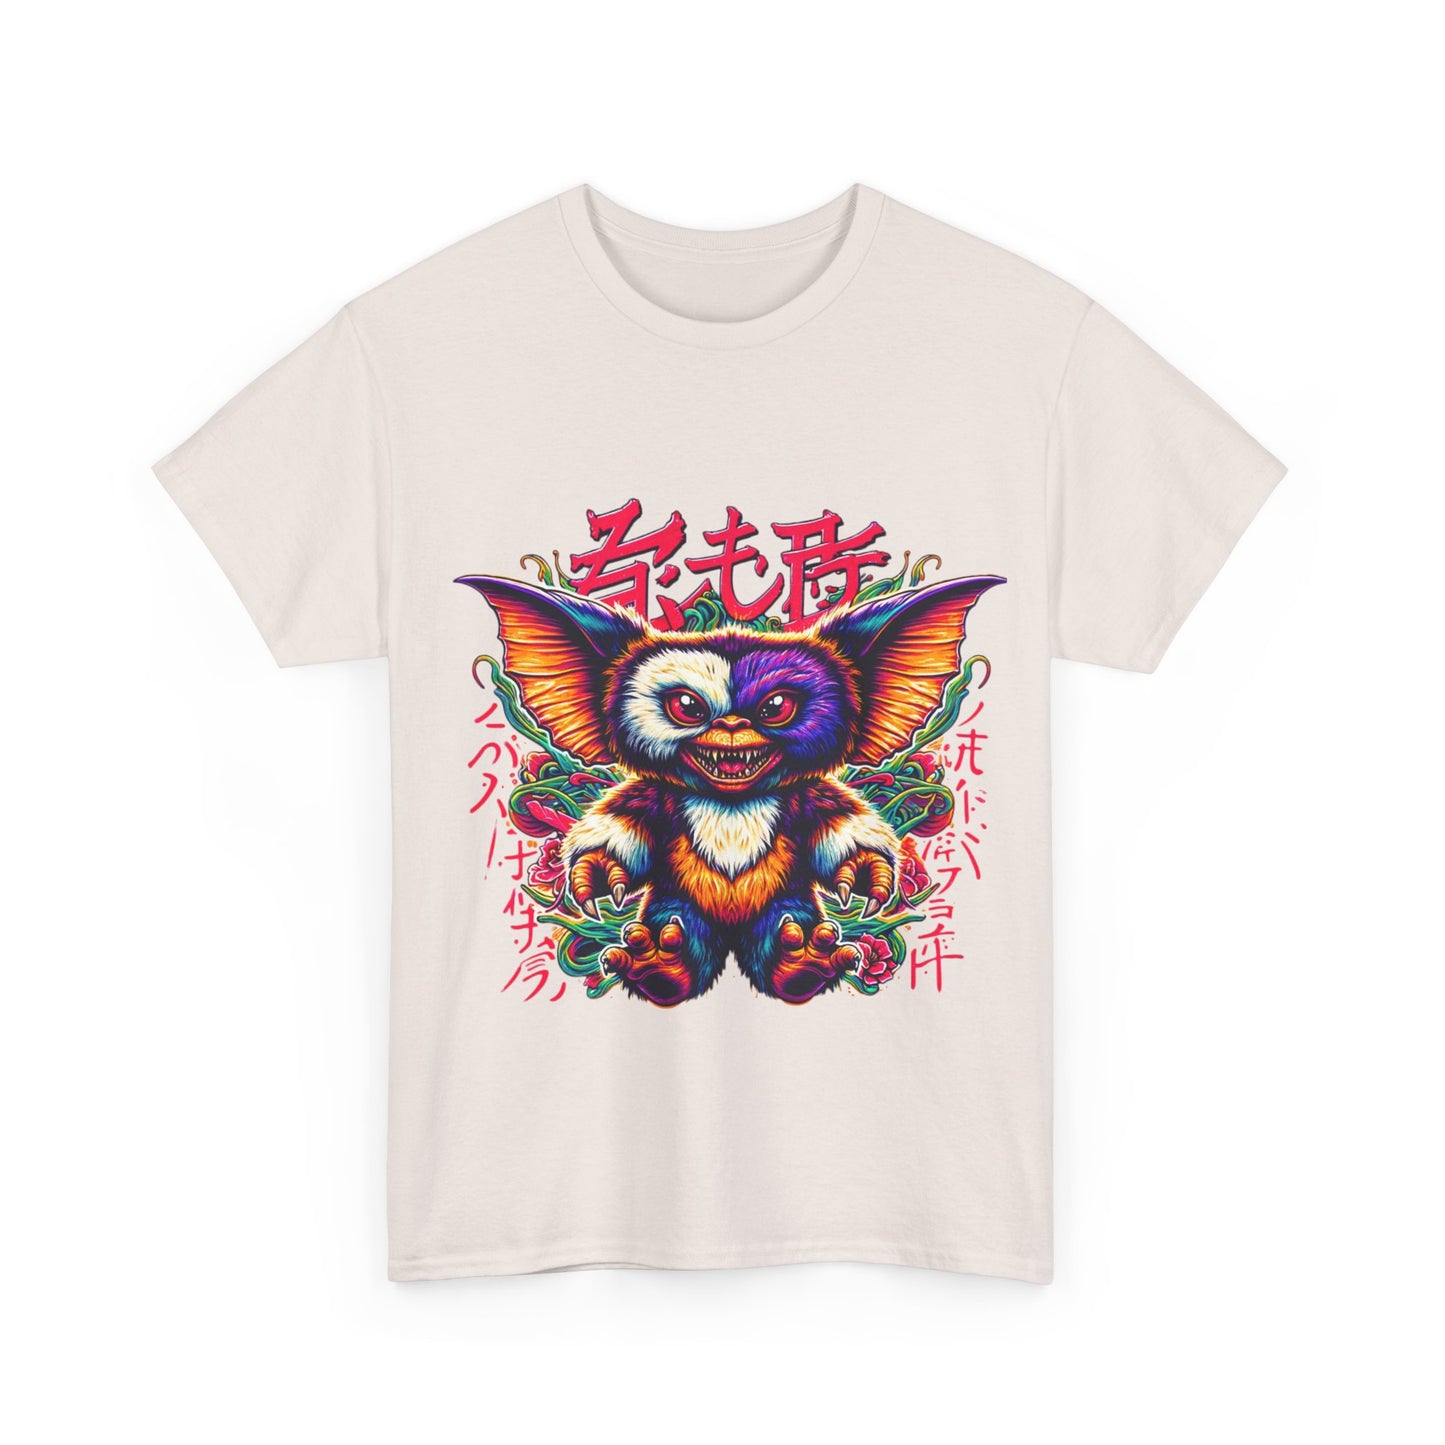 Y.M.L.Y. "Gremlins Out of Japan" Monsters T-shirt Cool T-Shirts Unisex Heavy Cotton Tee